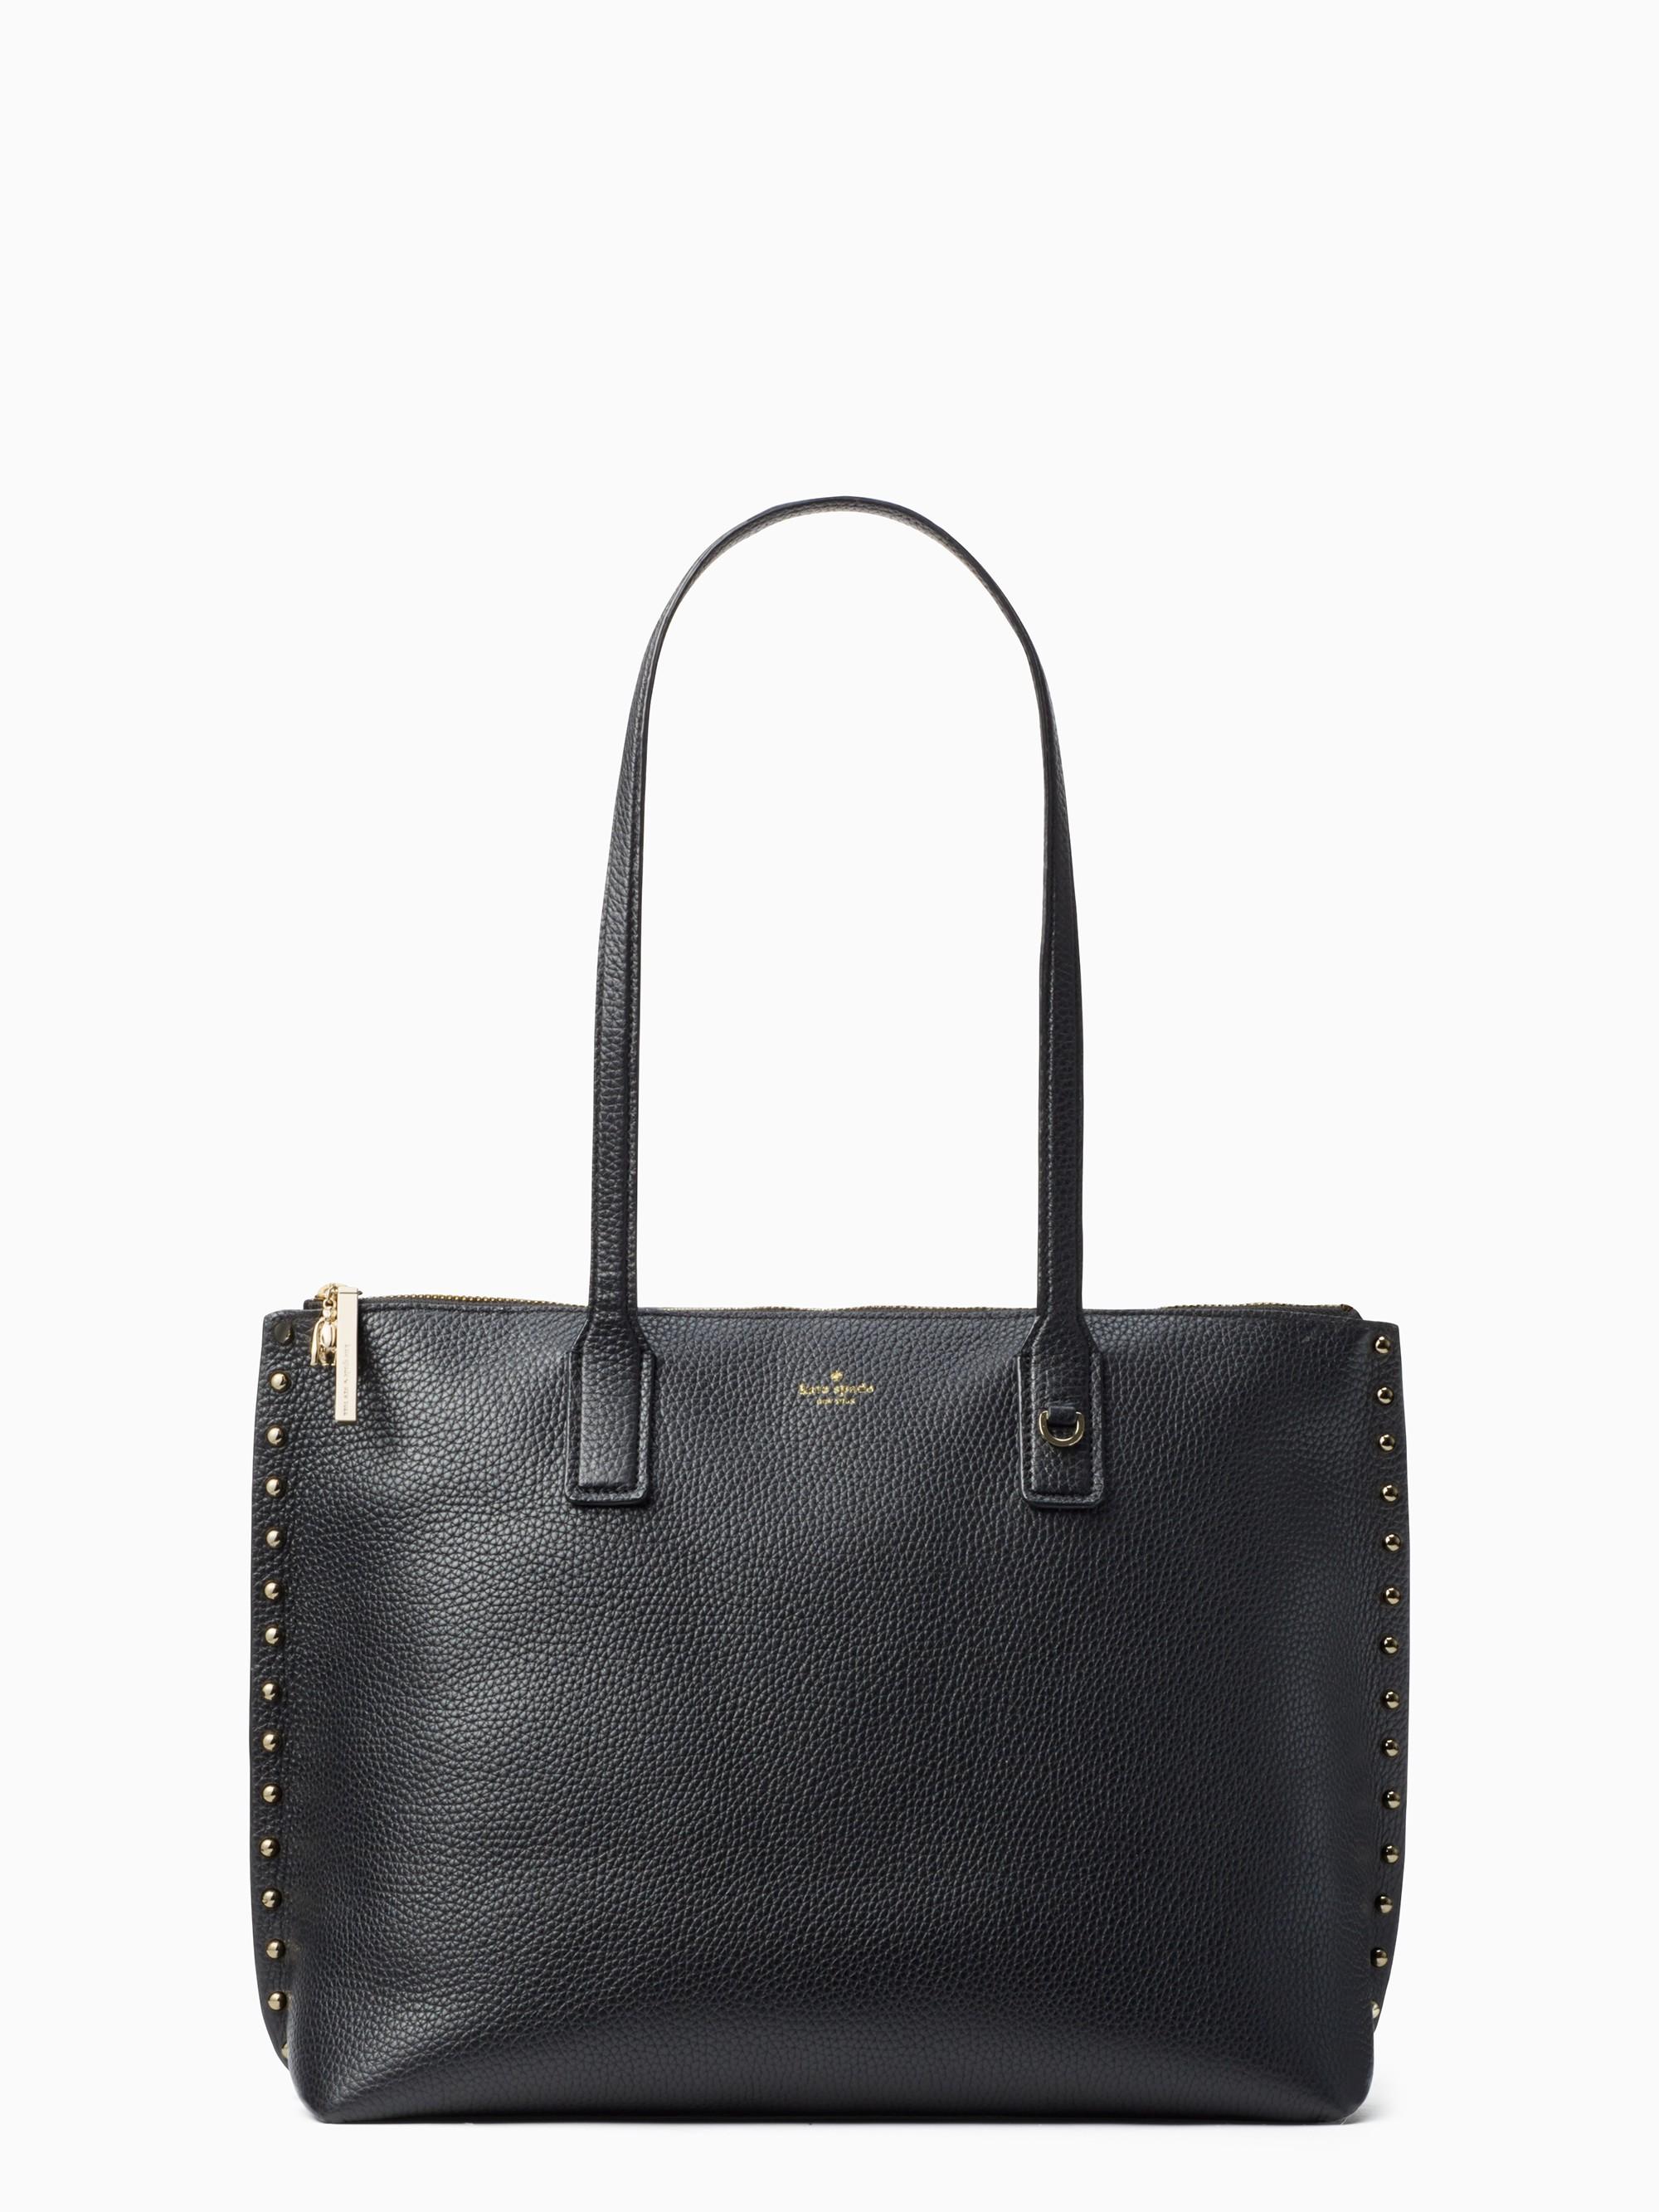 Kate Spade On Purpose Studded Leather Tote In Black | ModeSens